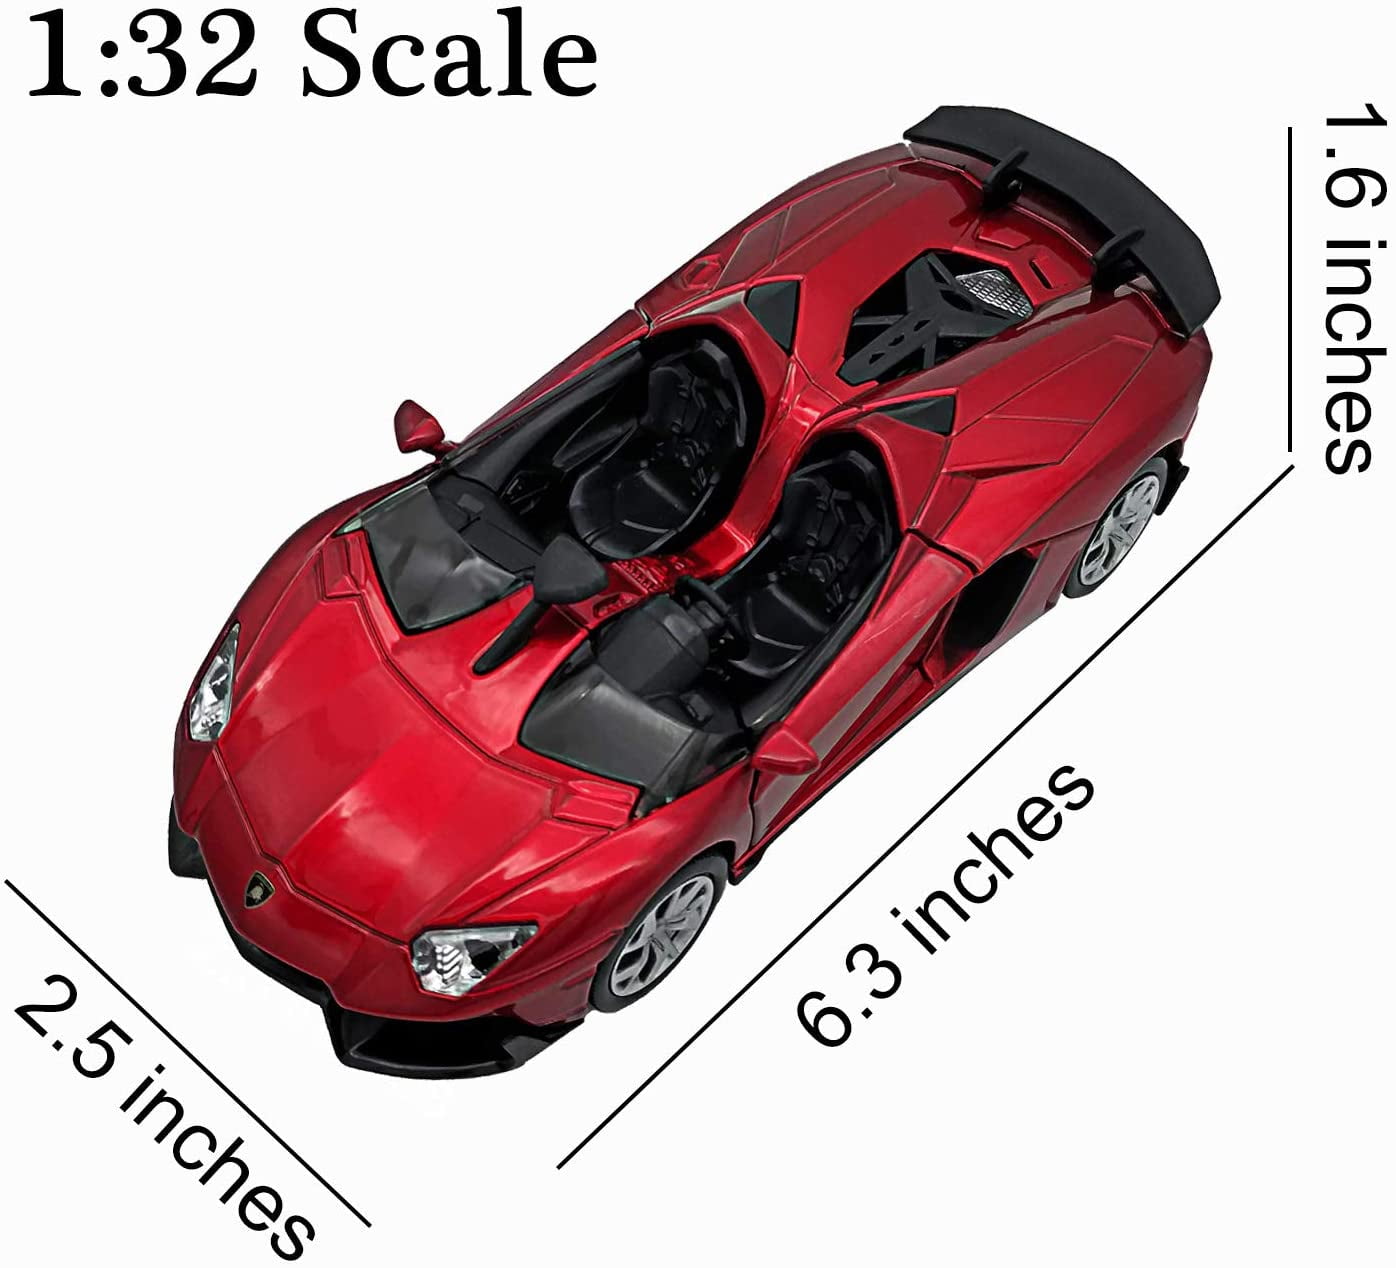 LMOY 1:32 Scale Die-cast Super Sports Car Lambo Aventador J Pull Back Cabriolet Metal Model Toy Car with Light & Sound Gift for Children Yellow 